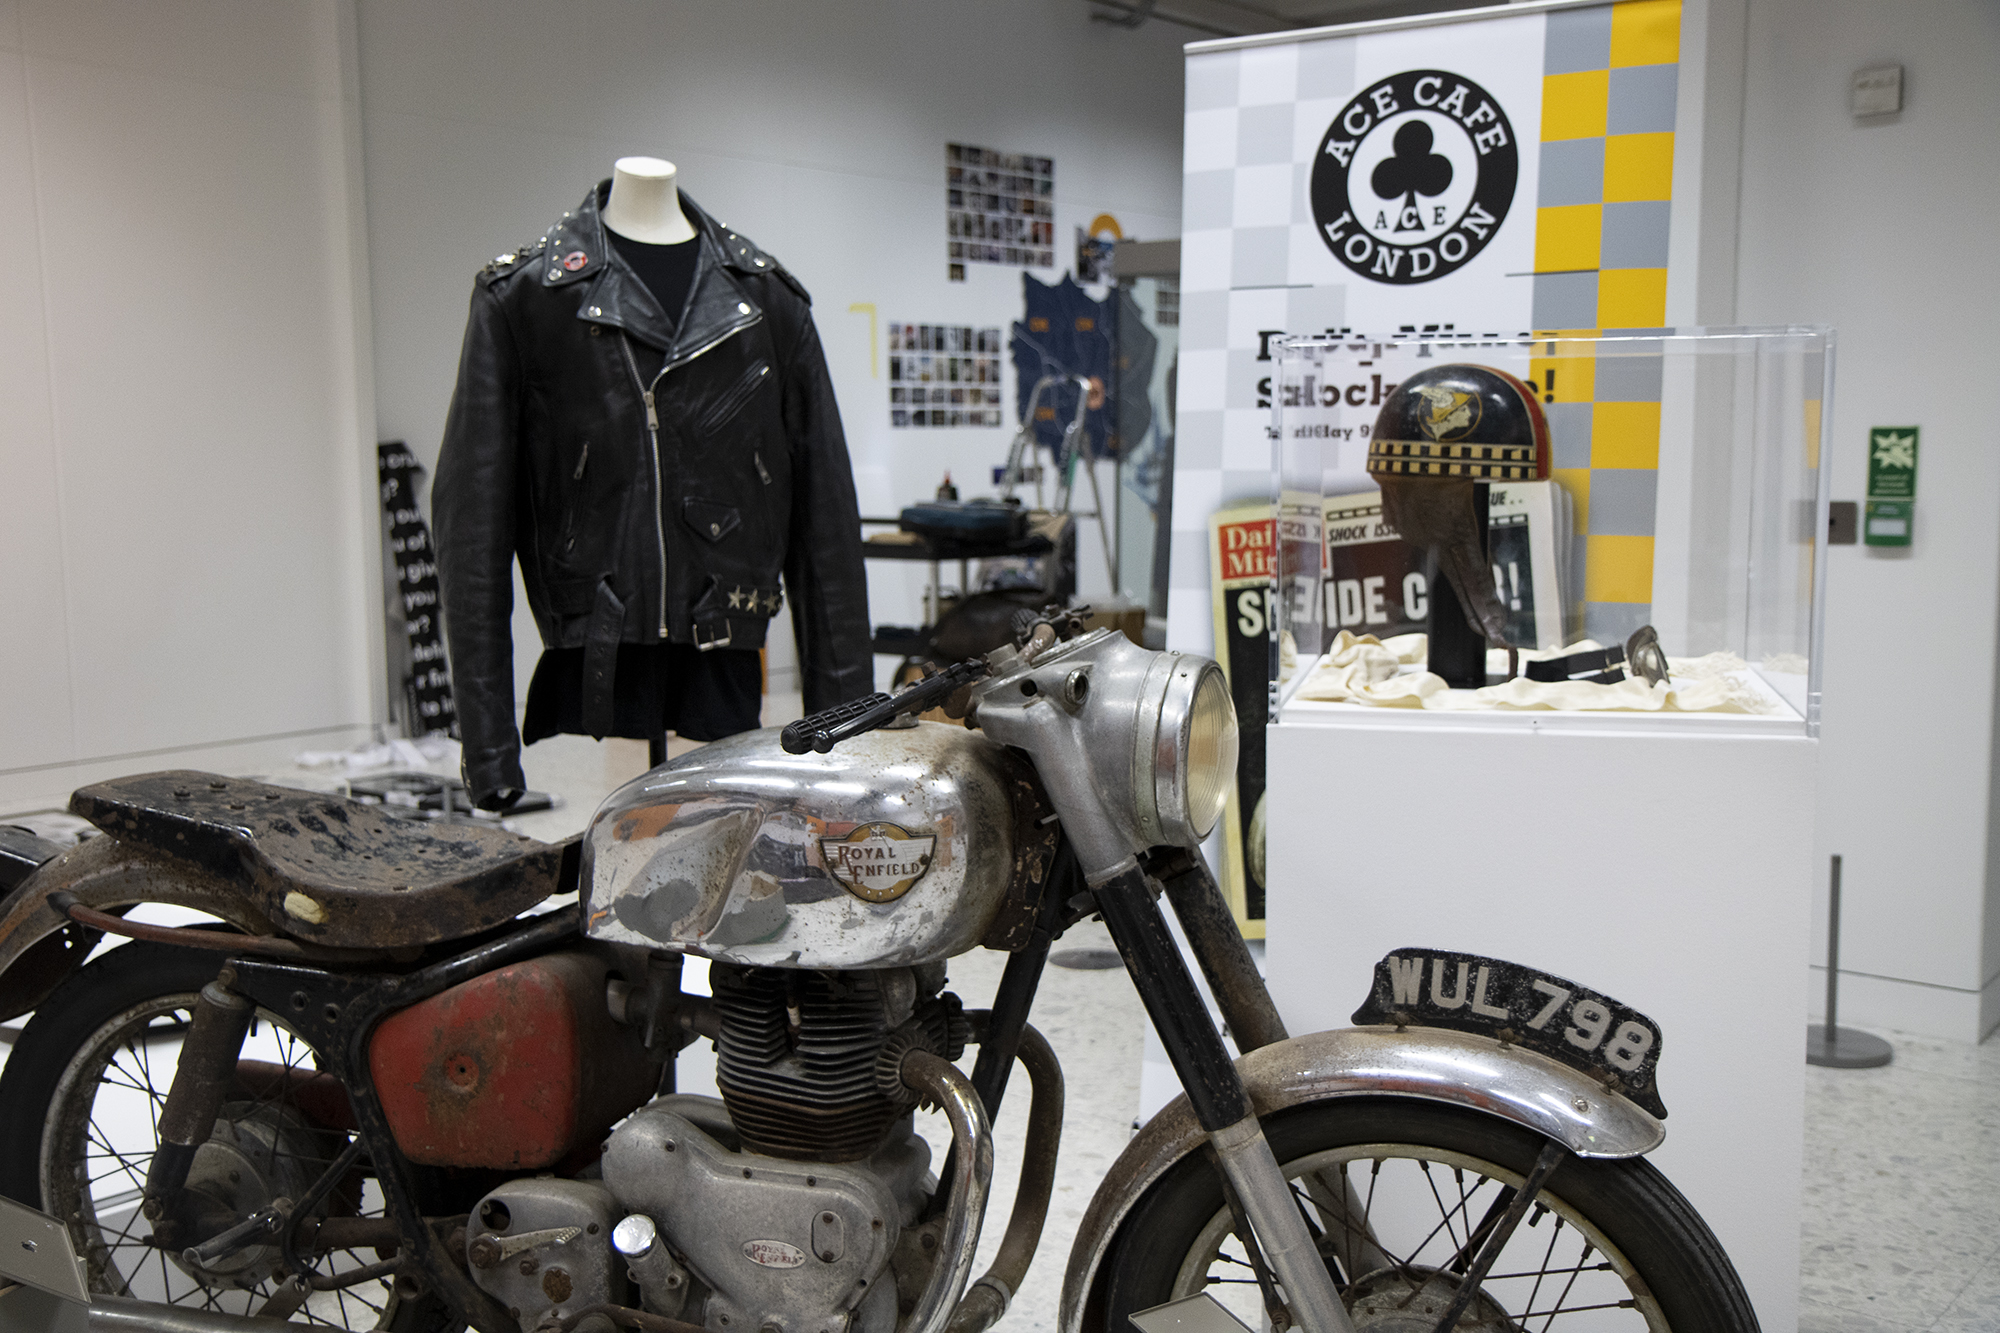 A photograph of a leather jacket, Royal Enfield motorcycle, helmet, goggles and a pop-up banner featuring the Ace Cafe logo, all on display in Grown Up in Britain